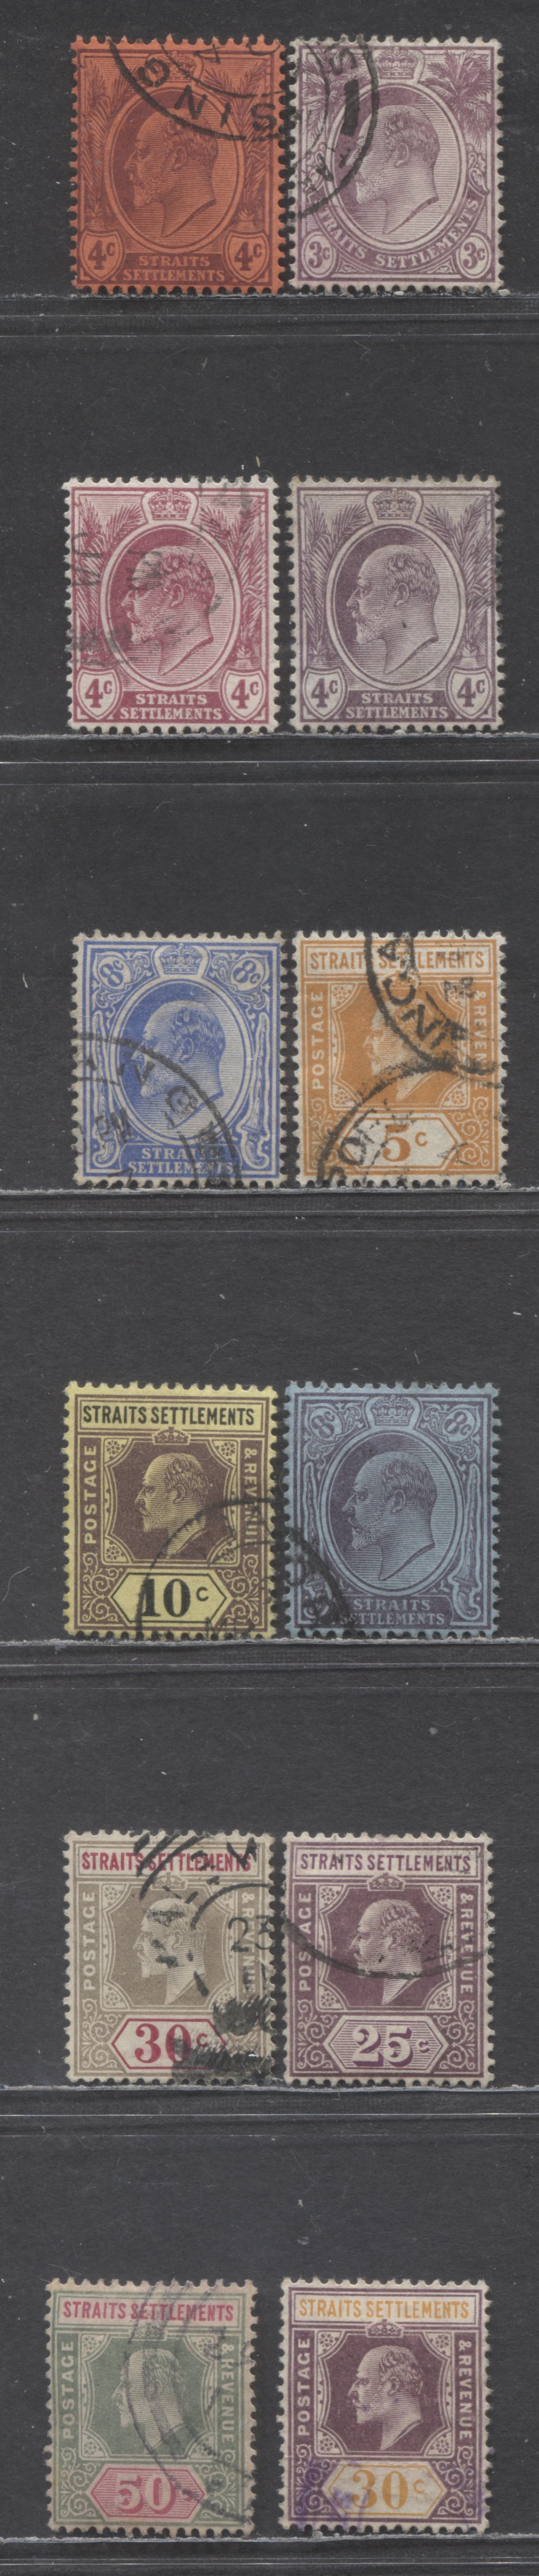 Lot 99 Straits Settlements SC#110/134 1904-1911 King Edward VII Issue, 3c, 4c, 25c, 30c, 50c On Chalky Paper, Rest On Ordinary Paper, Multiple Crown CA Wmk, 12 Fine/Very Fine Used Singles, Click on Listing to See ALL Pictures, Estimated Value $25